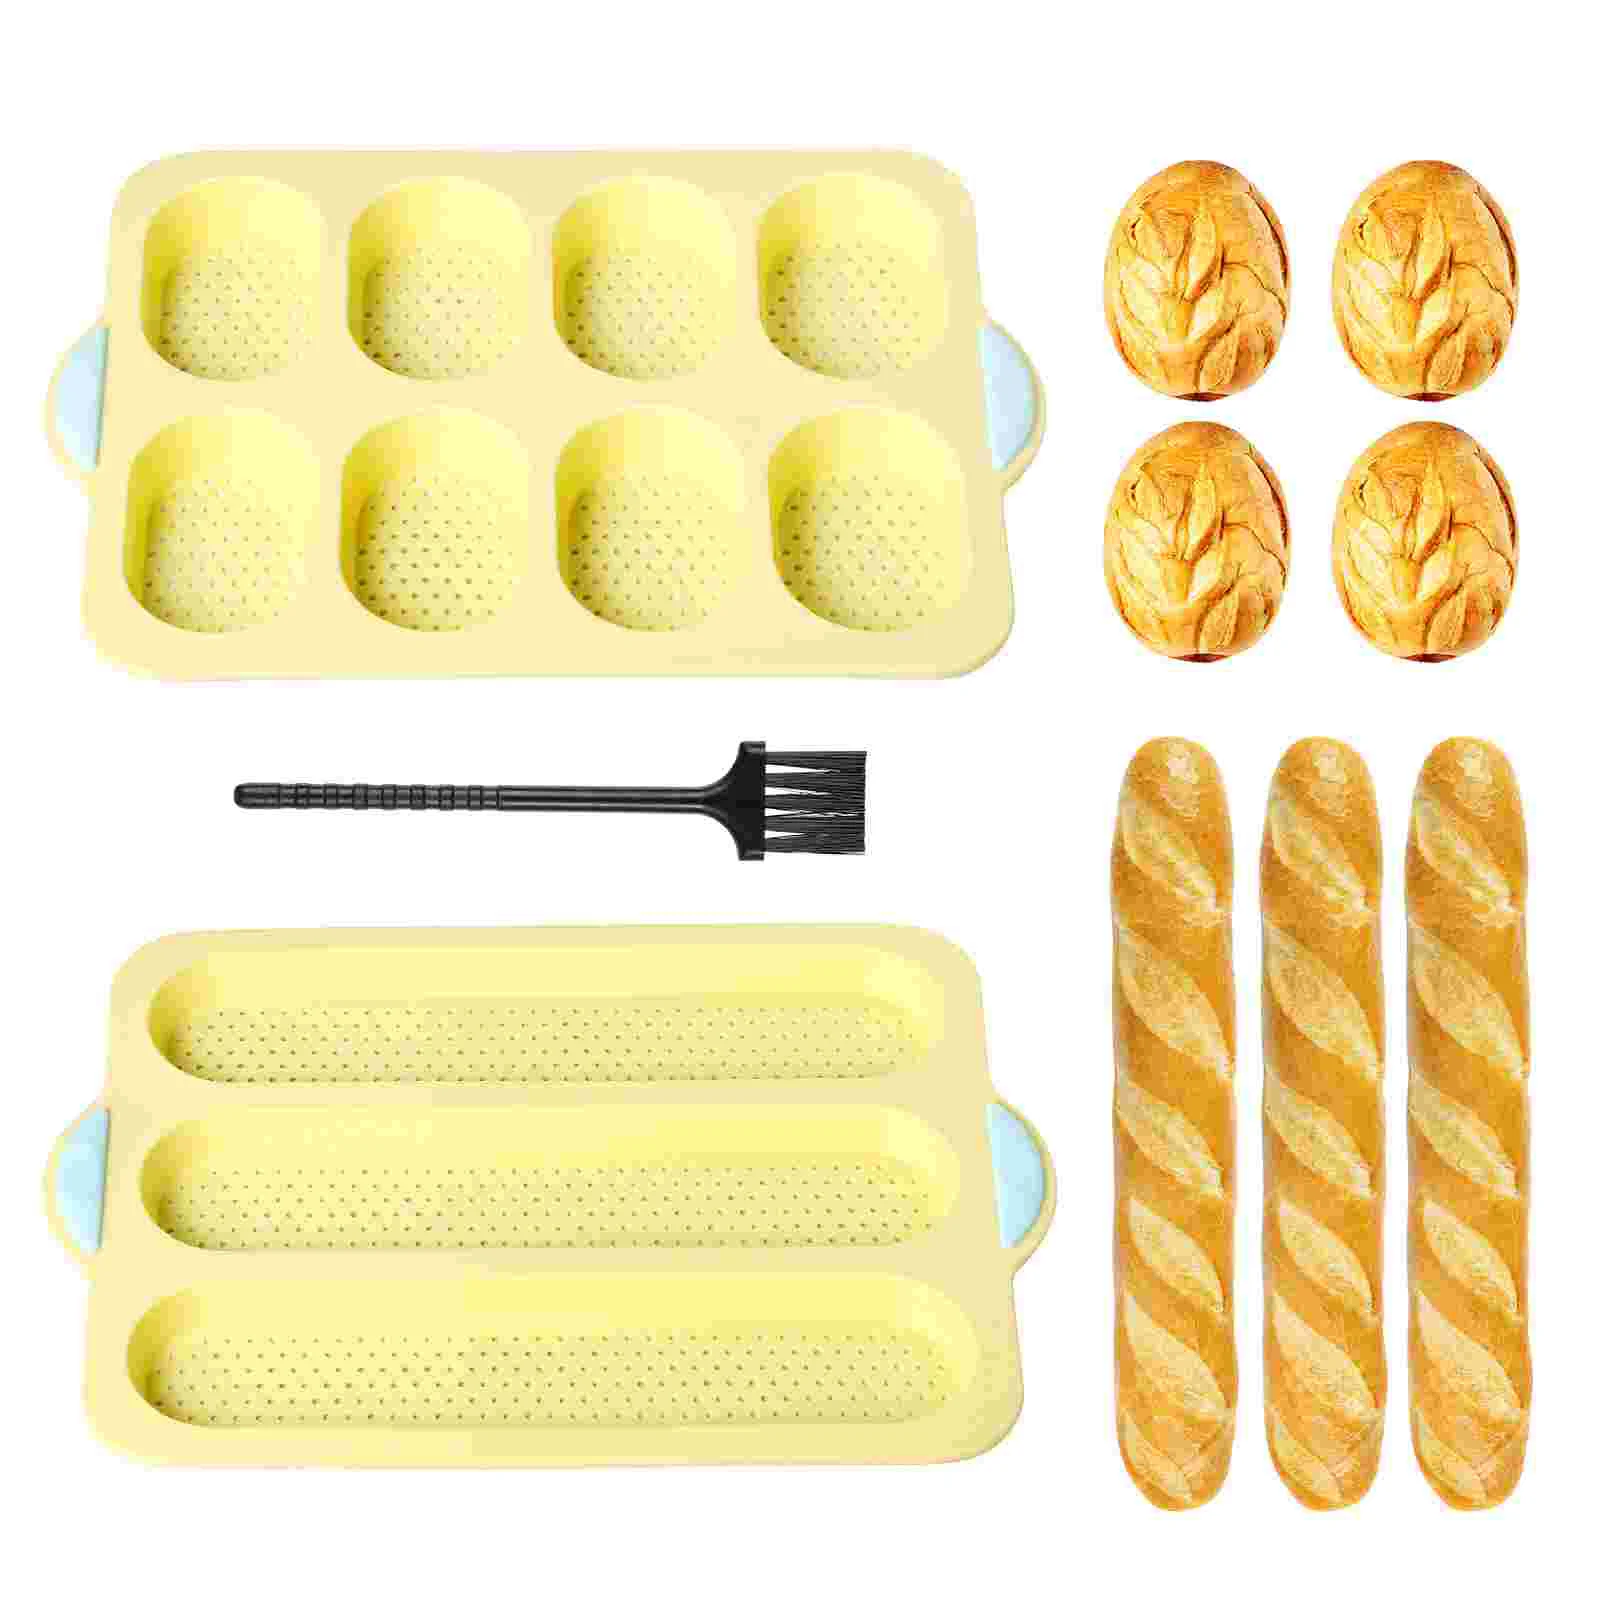 

Baking Pan Bread Silicone Loaf Pans Tray French Cupcake Moulds Mini Tins Homemade Molds Mould Set Muffin Cake Trays Bakeware Bun